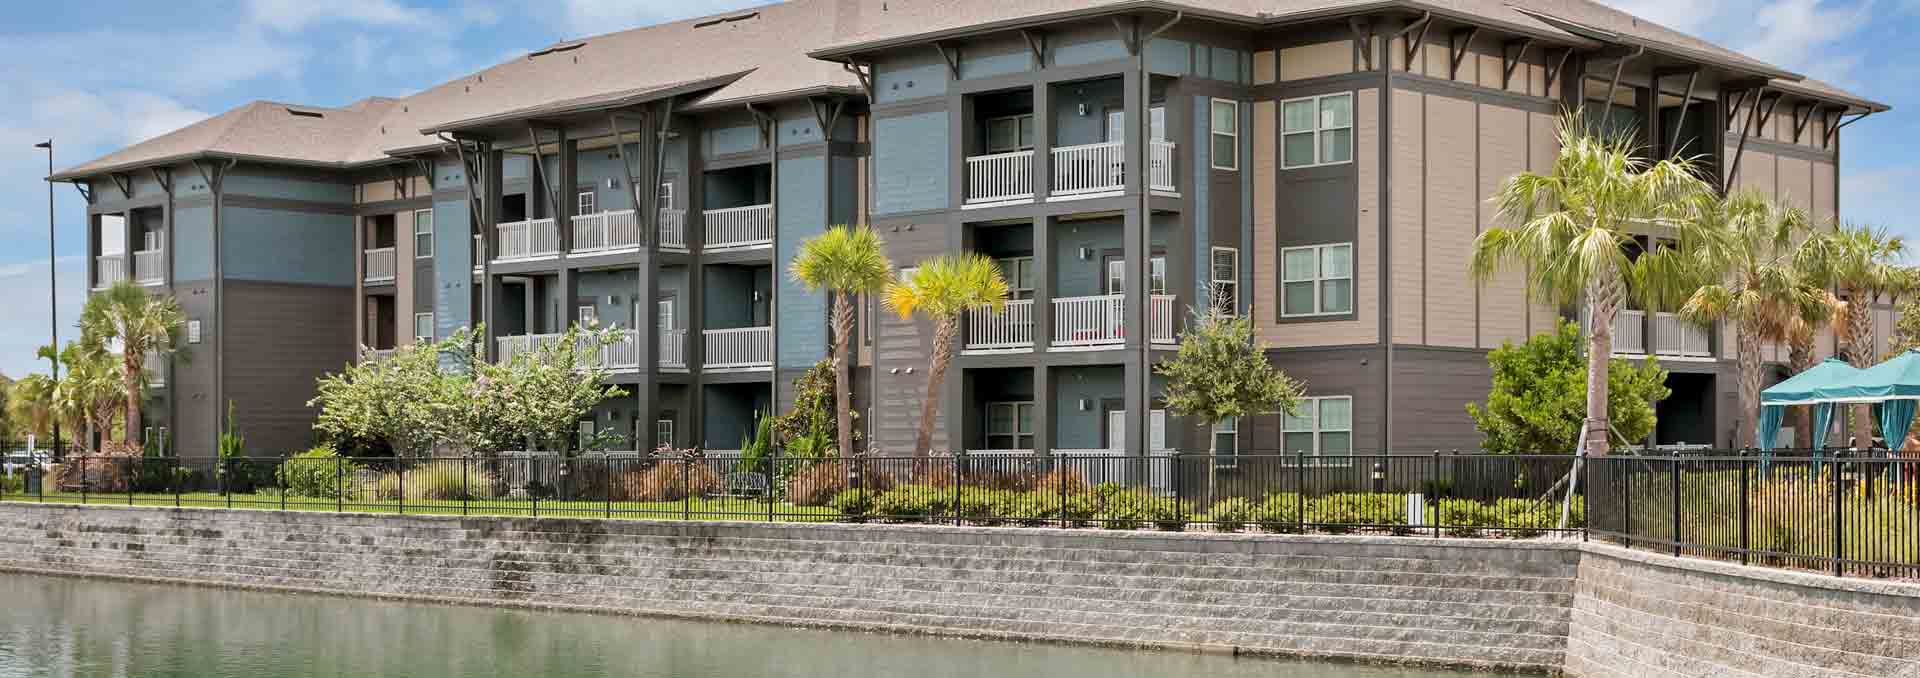 ,Apartments Near Clearwater  ,apartments near clearwater beach  ,apartments near clearwater mn  ,apartments near clearwater high school  ,apartments near clearwater mall  ,apartments near clearwater marine aquarium  ,apartments for rent clearwater fl craigslist  ,apartments for rent clearwater bay hong kong  ,apartments for rent clearwater sc  ,apartments for rent clearwater bc  ,apartments near spc clearwater  ,apartments for rent clearwater fl area  ,apartments near st pete clearwater airport  ,apartments near clearwater beach fl  ,apartments for rent clearwater bay hk  ,apartments for rent near clearwater beach  ,apartments for rent clearwater fl bad credit  ,apartments near gulf to bay clearwater fl  ,best apartments near clearwater fl  ,apartments near belcher rd clearwater fl  ,cheap apartments near clearwater fl  ,apartments near st petersburg college clearwater campus  ,apartments near countryside mall clearwater fl  ,apartments near clearwater fl  ,apartments for rent downtown clearwater  ,apartments for rent clearwater fl 33761  ,apartments for rent downtown clearwater fl  ,apartments near tech data clearwater  ,duplex apartments for rent clearwater fl  ,furnished apartments near clearwater fl  ,studio apartments near clearwater fl  ,luxury apartments near clearwater fl  ,apartments for rent near clearwater fl  ,apartments near clearwater beach florida  ,apartments for rent in clearwater fl with utilities included  ,studio apartments for rent clearwater fl  ,zillow apartments for rent clearwater fl  ,furnished apartments for rent clearwater fl  ,apartments near morton plant hospital clearwater fl  ,apartments for rent near morton plant hospital clearwater fl  ,apartments for rent in clearwater fl  ,apartments for rent in clearwater beach fl  ,apartments for rent in clearwater mn  ,apartments for rent in clearwater fl craigslist  ,apartments for rent in clearwater bc  ,apartments for rent in clearwater florida for cheap  ,apartments to rent near clearwater mall johannesburg  ,apartments for rent clearwater ks  ,apartments for rent on clearwater largo road  ,apartments for rent in clearwater largo fl  ,pet friendly apartments near clearwater fl  ,apartments for sale near clearwater fl  ,apartments near me clearwater fl  ,apartments for rent near me clearwater fl  ,clearwater apartments near me  ,apartments for rent on clearwater beach  ,apartments for rent on clearwater fl  ,apartments near st pete college clearwater  ,apartments for rent near clearwater beach fl  ,apartments for rent near clearwater florida